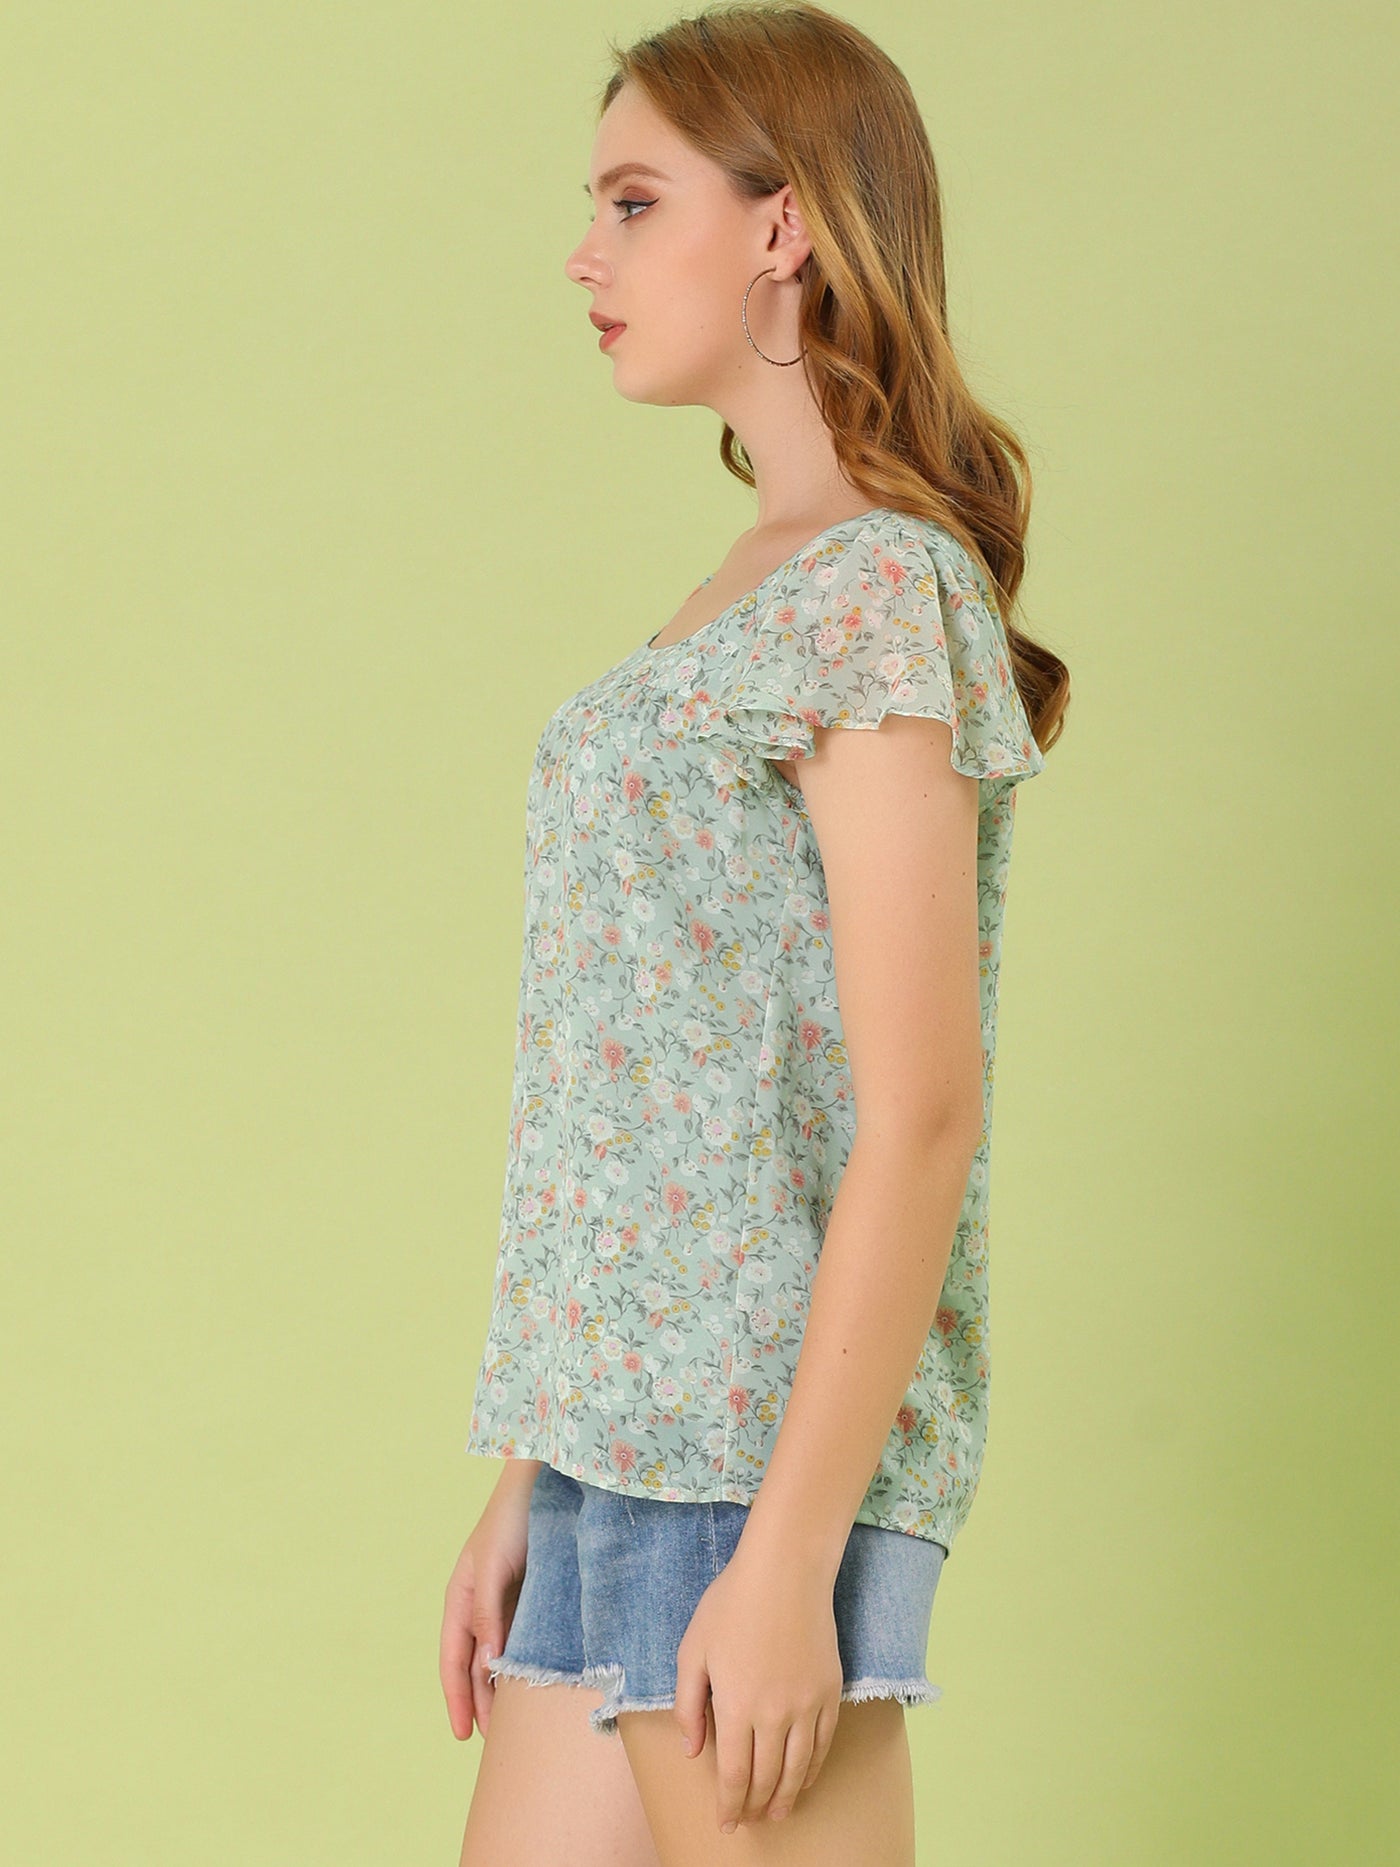 Allegra K Chiffon Ruffle Sleeve Top Layered Vintage Ditsy Floral Blouse